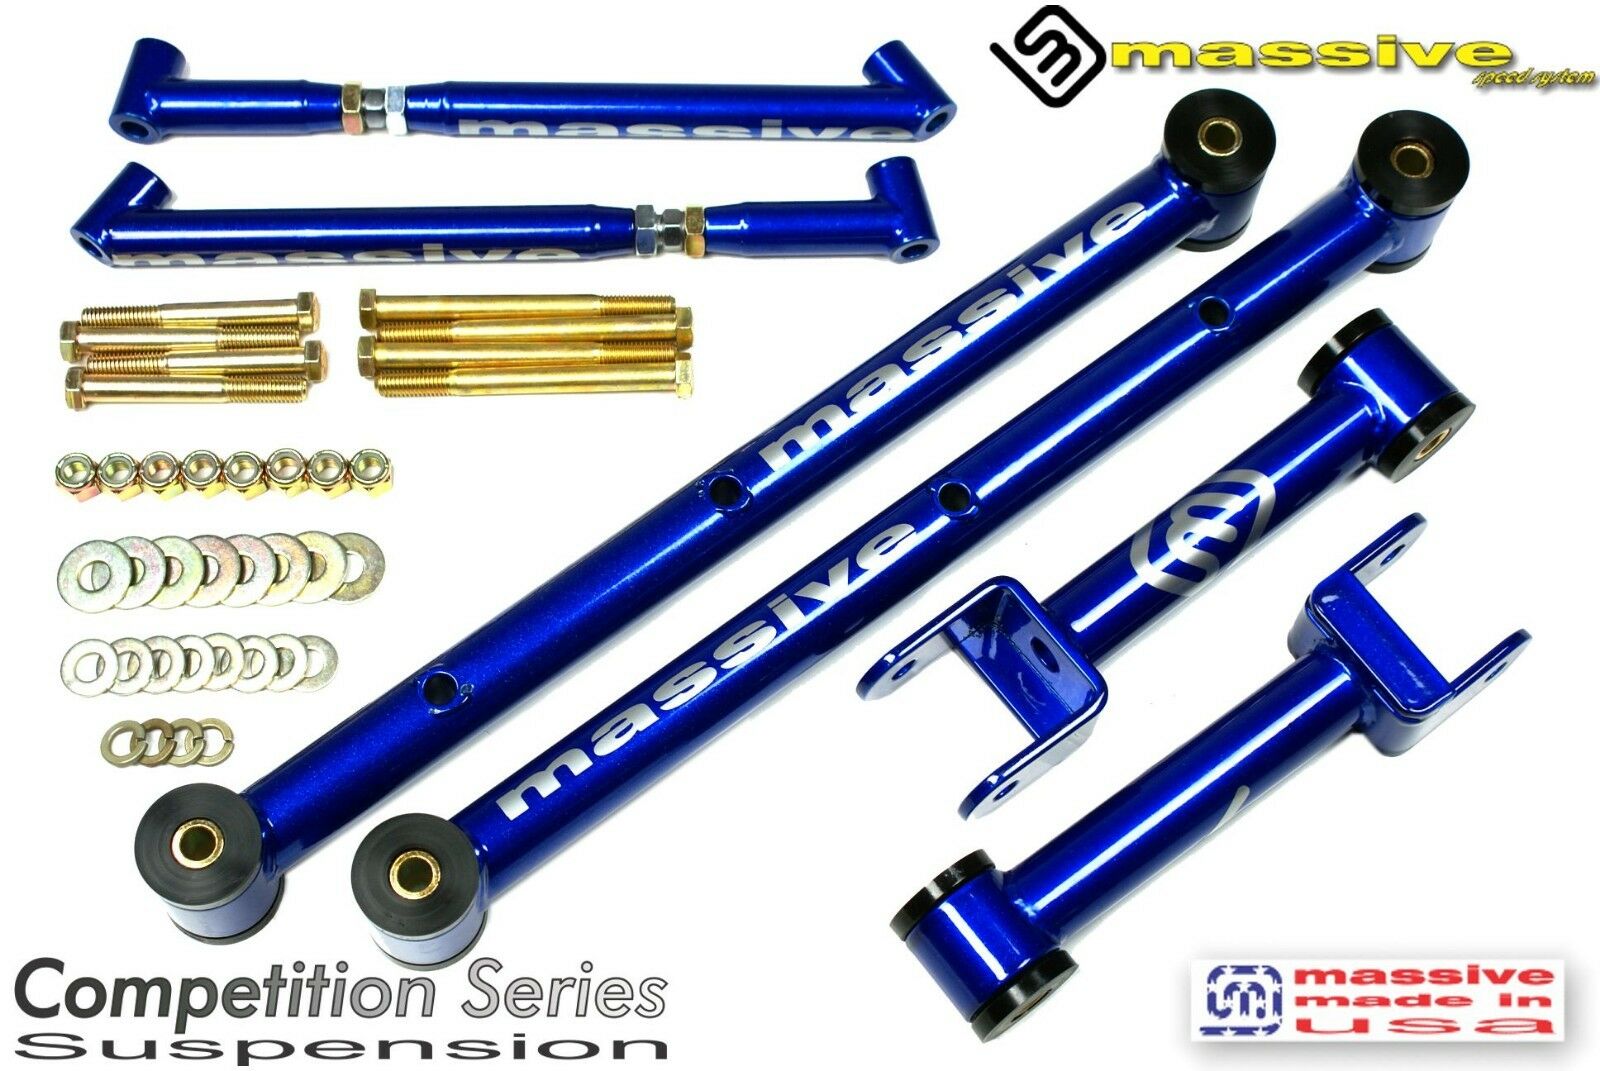 MassiveTRACTION SATISFACTION COMPETITION SERIES Upper Lower Control Arms and Braces 68-72 A GM  Body - Massive Speed System